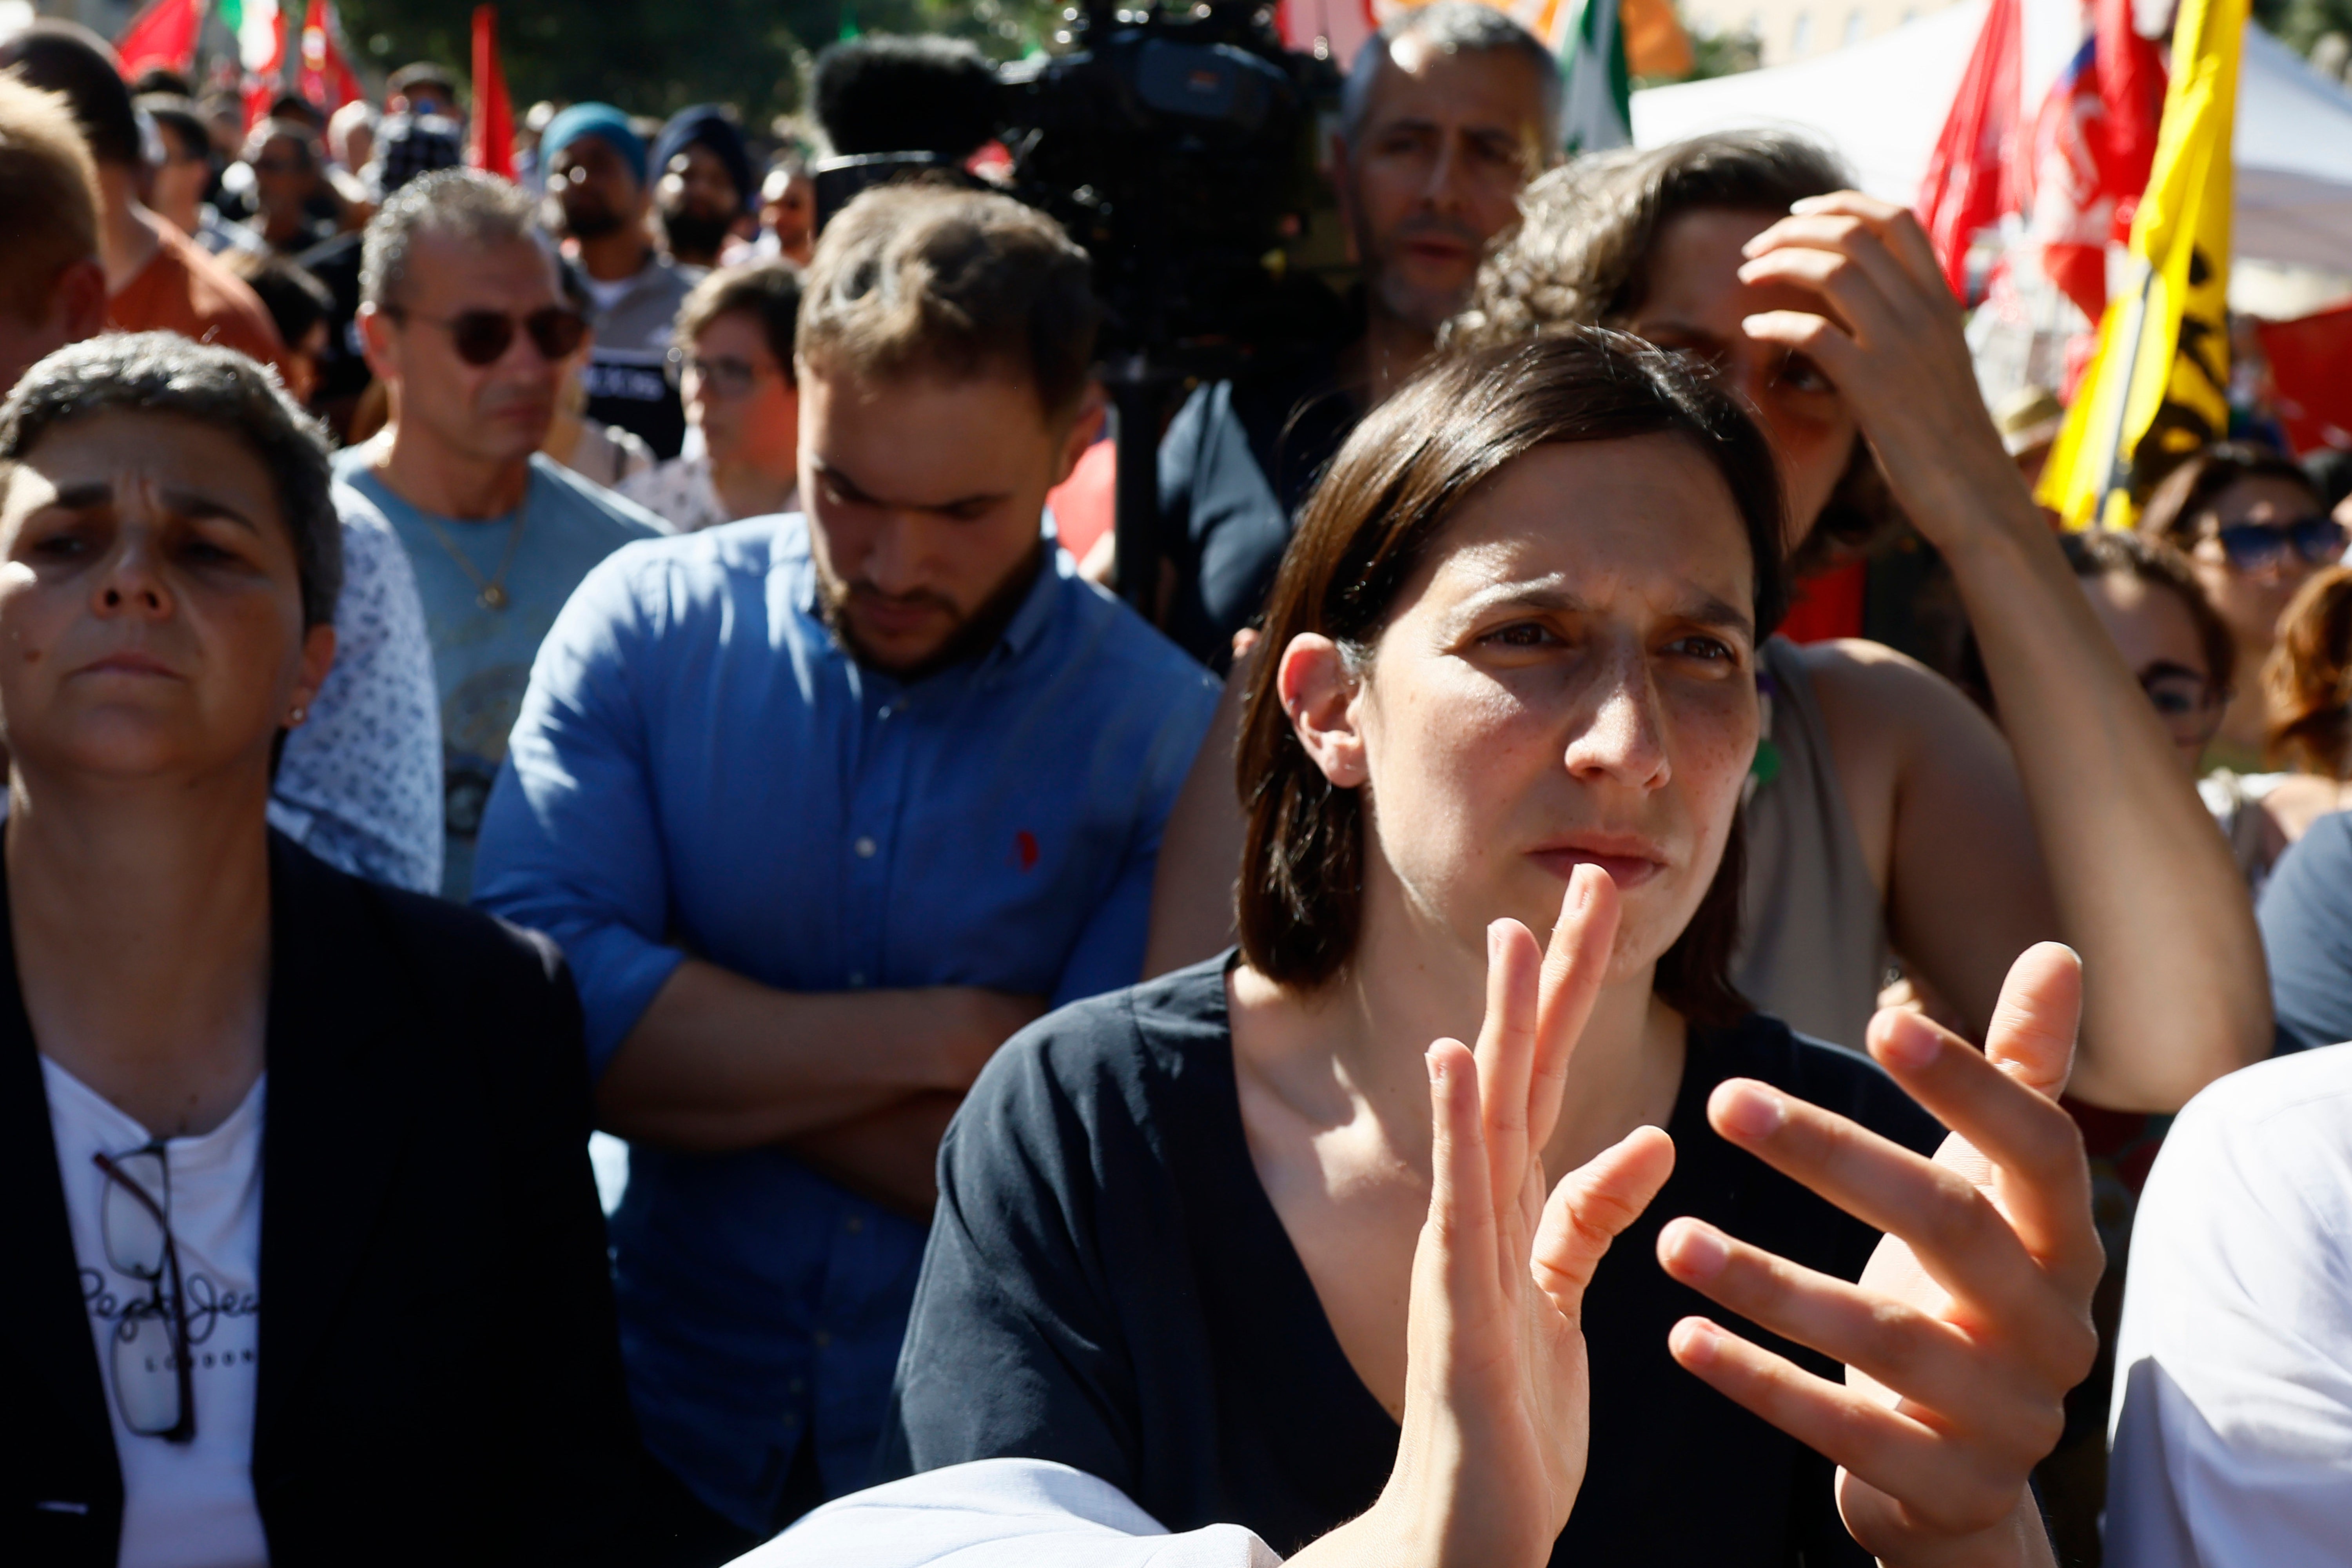 Italian Democratic party leader Elly Schlein participates in a rally with members of the Indian community in Italy